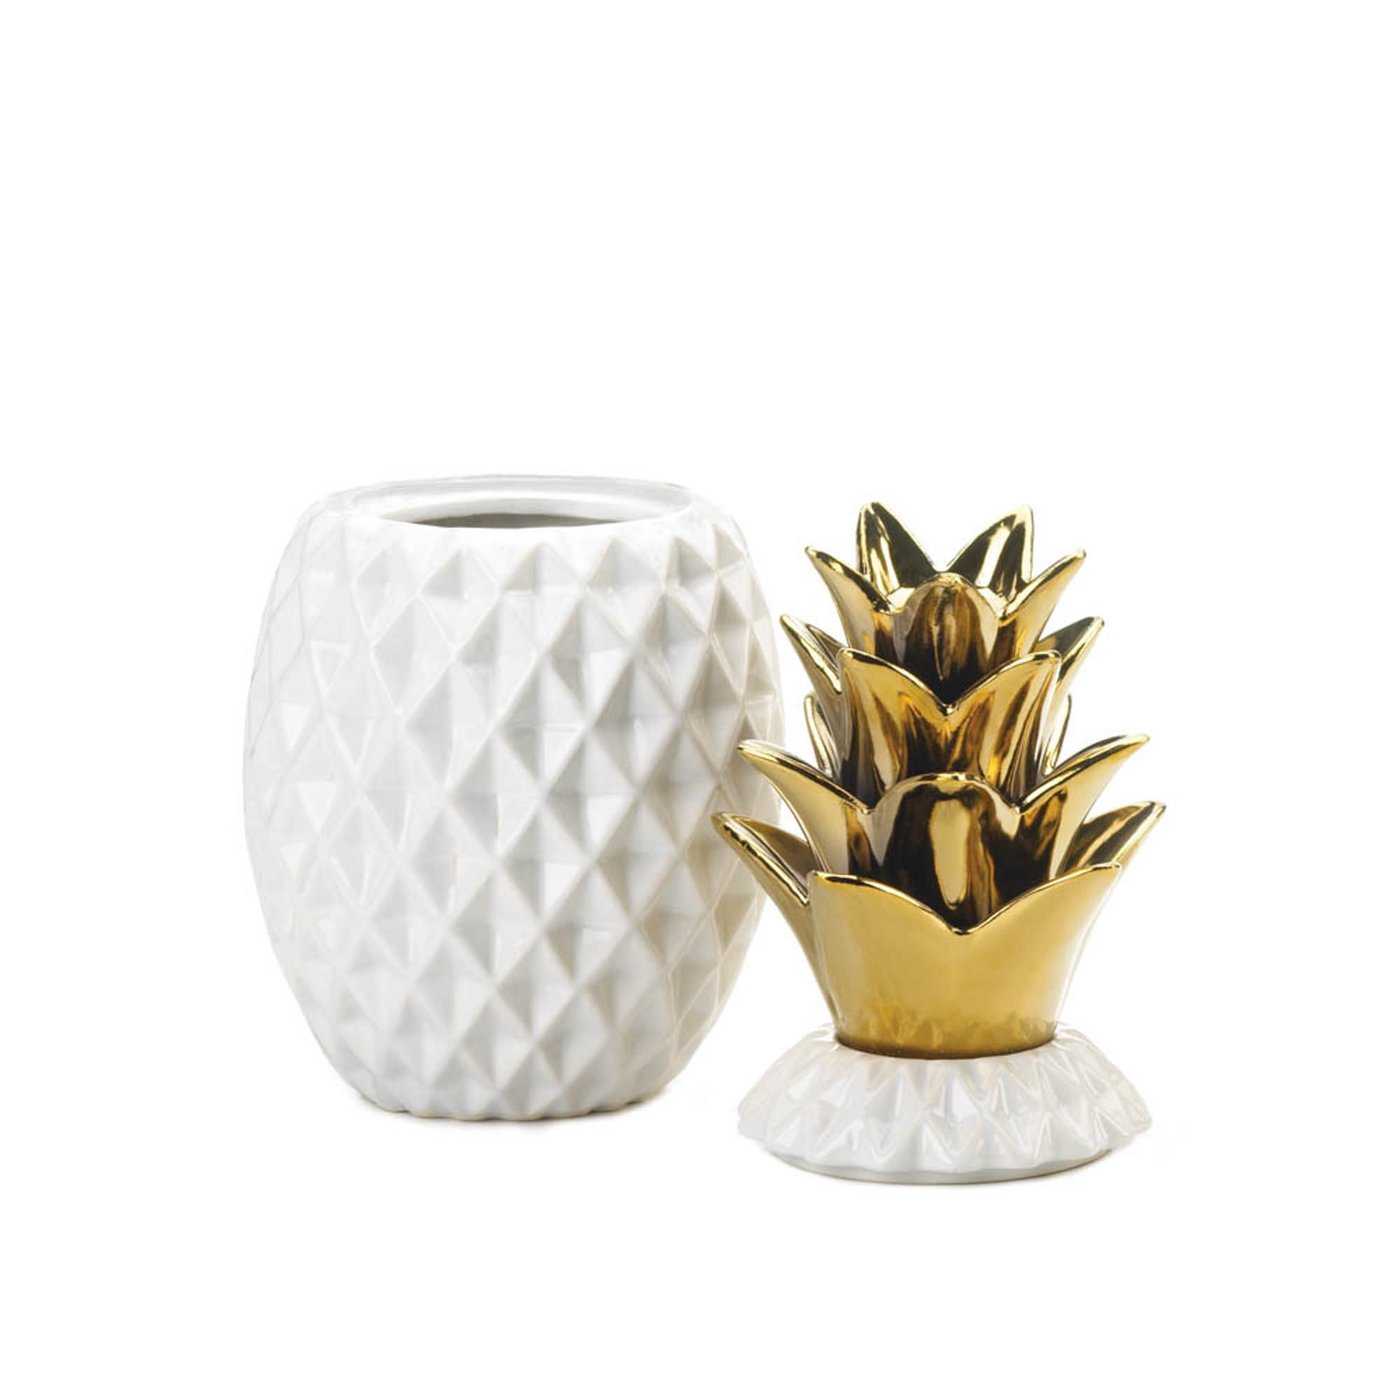 Gold Topped Pineapple Jar